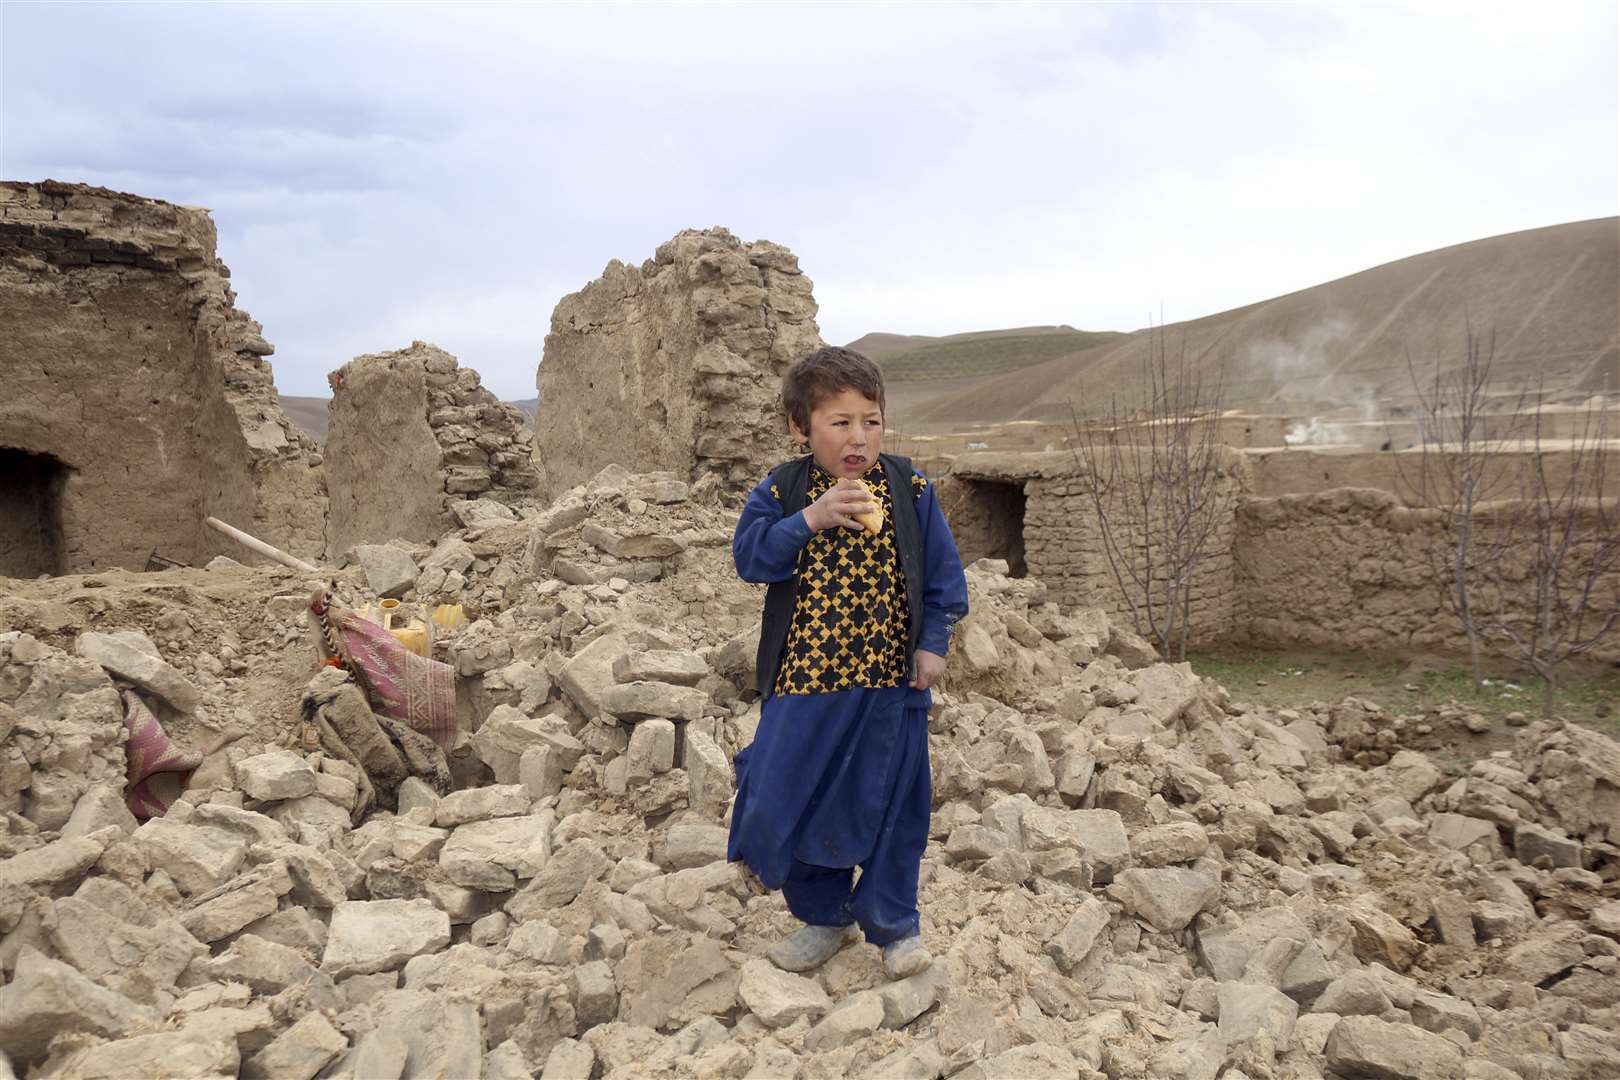 A boy stands near to his damaged house after it was hit by an earthquake in a remote western province of Badghis, Afghanistan last week (Abdul Raziq Saddiqi/AP)